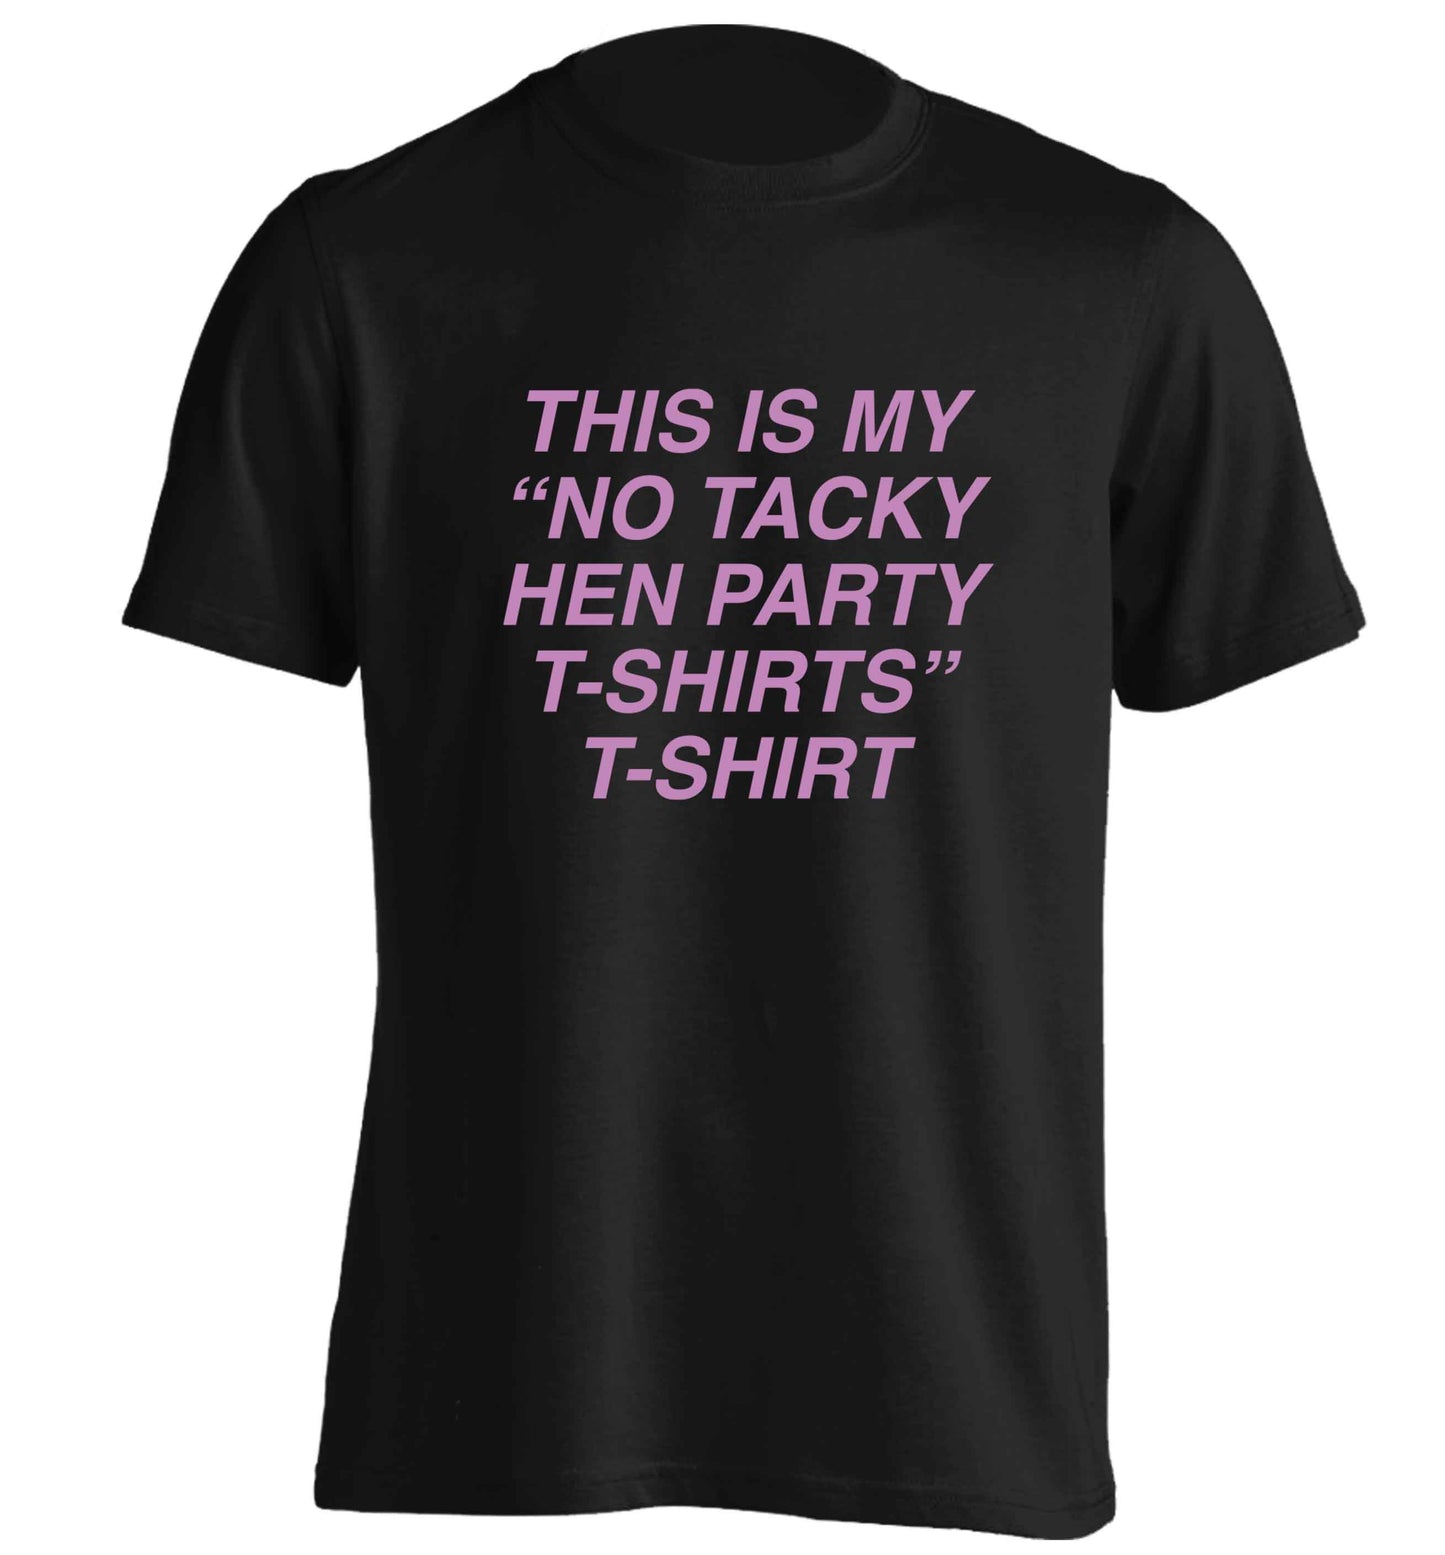 This is my 'no tacky hen party T-Shirt'  adults unisex black Tshirt 2XL